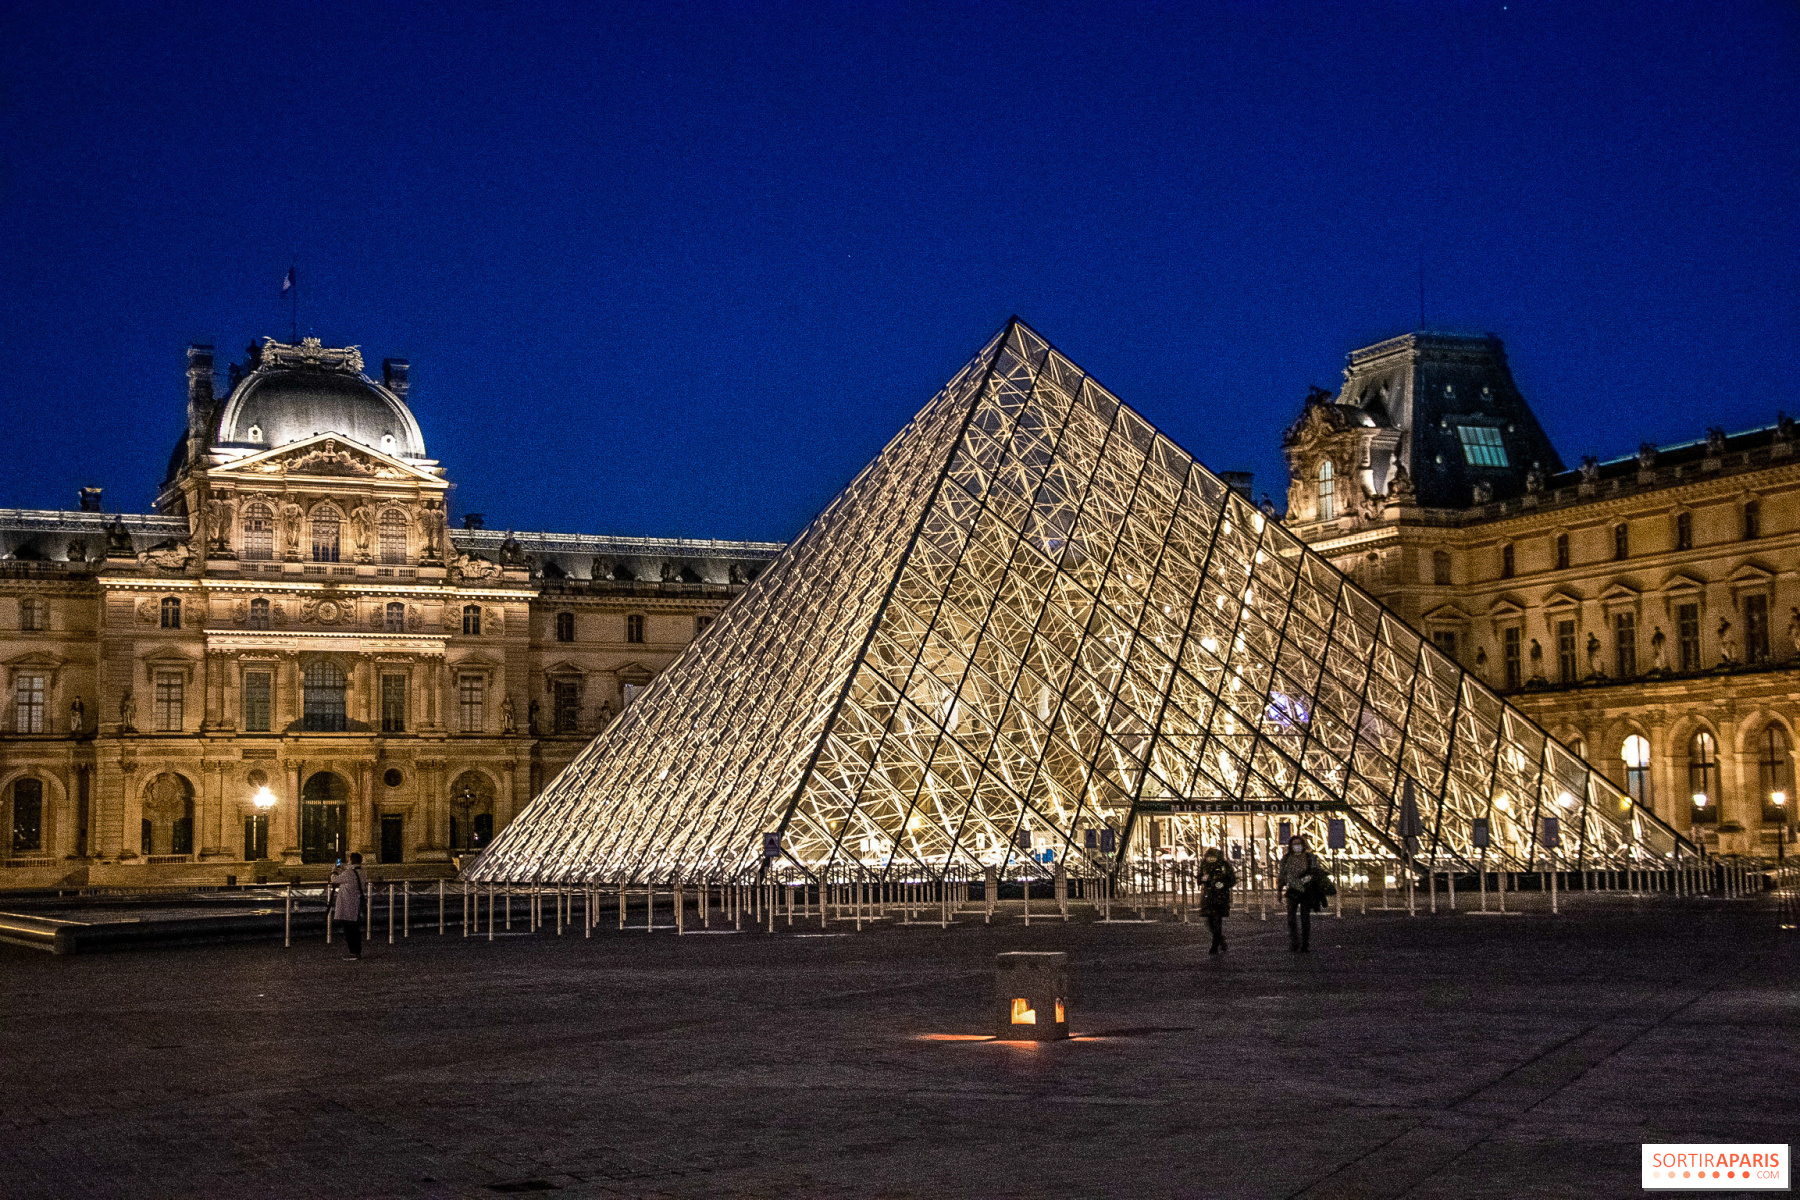 Visit the Louvre Museum to embark on an artistic adventure